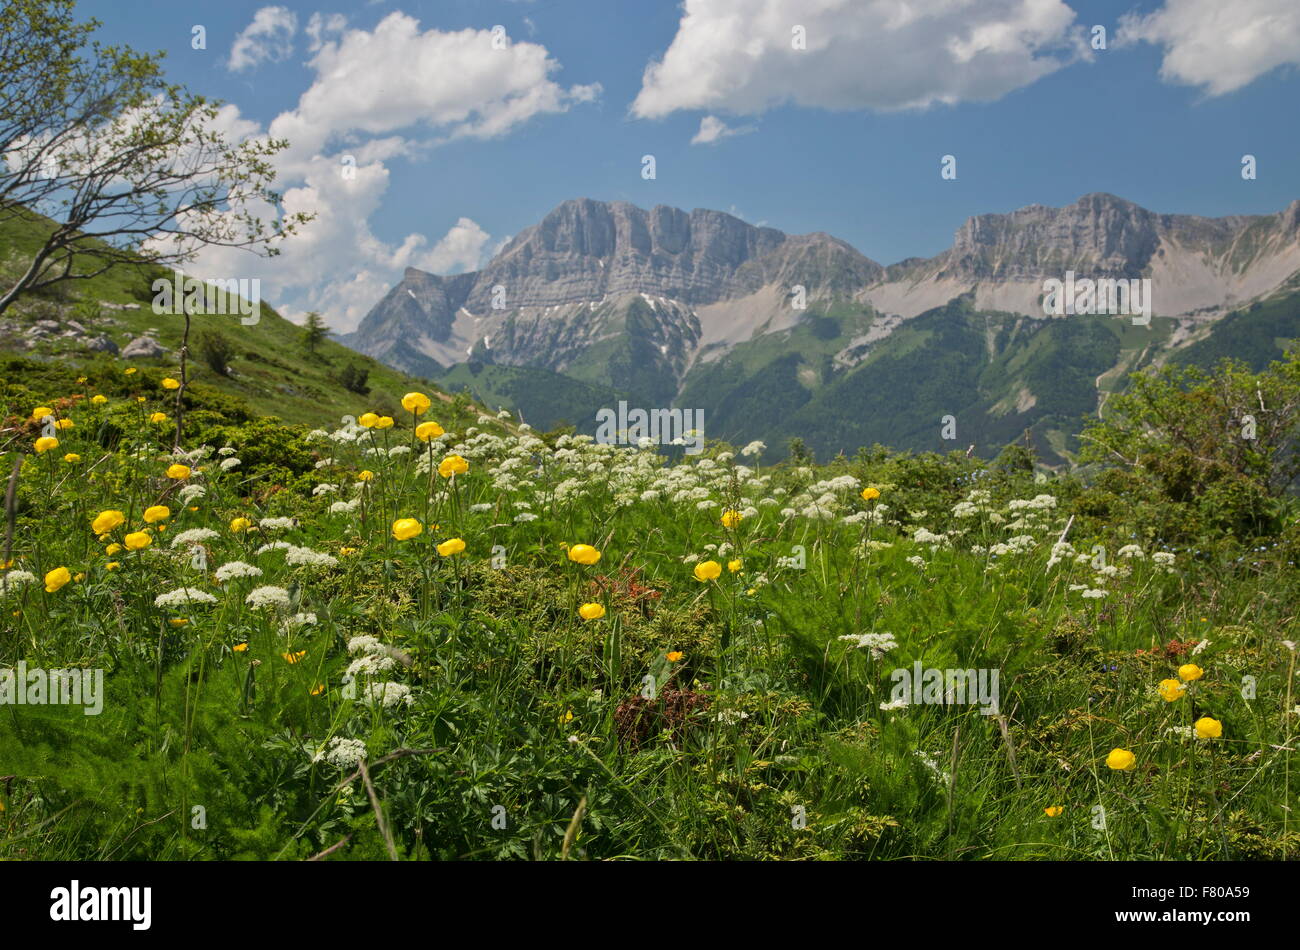 High flowery pastures, with globe flowers, at the Pas du serpaton, montagne de Gresse, Vercors, France. Stock Photo